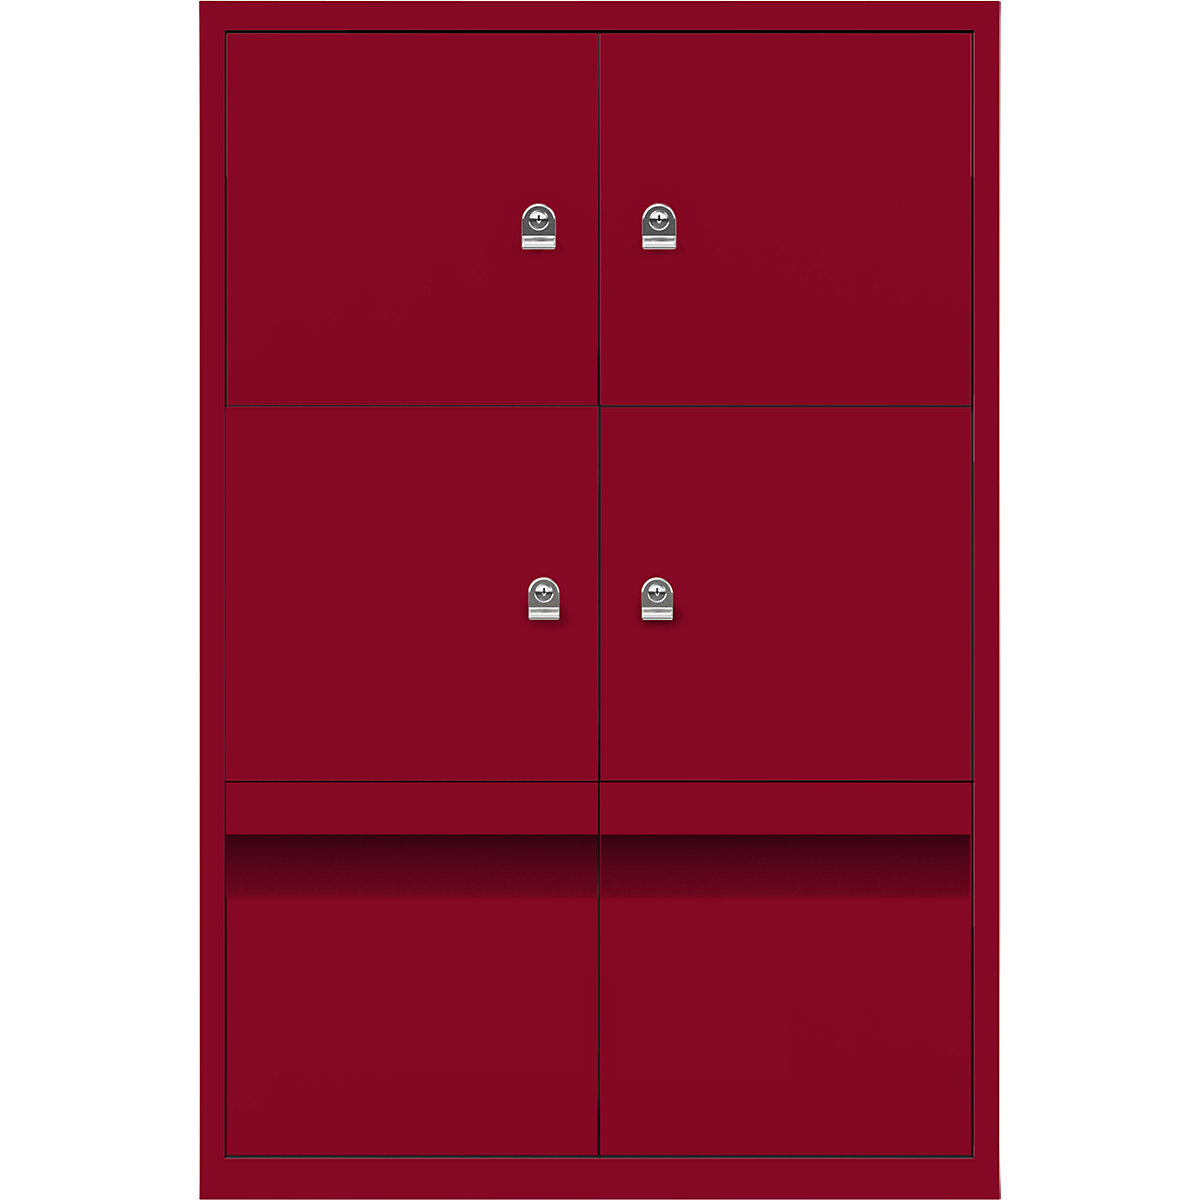 LateralFile™ lodge – BISLEY, with 4 lockable compartments and 2 drawers, height 375 mm each, cardinal red-24